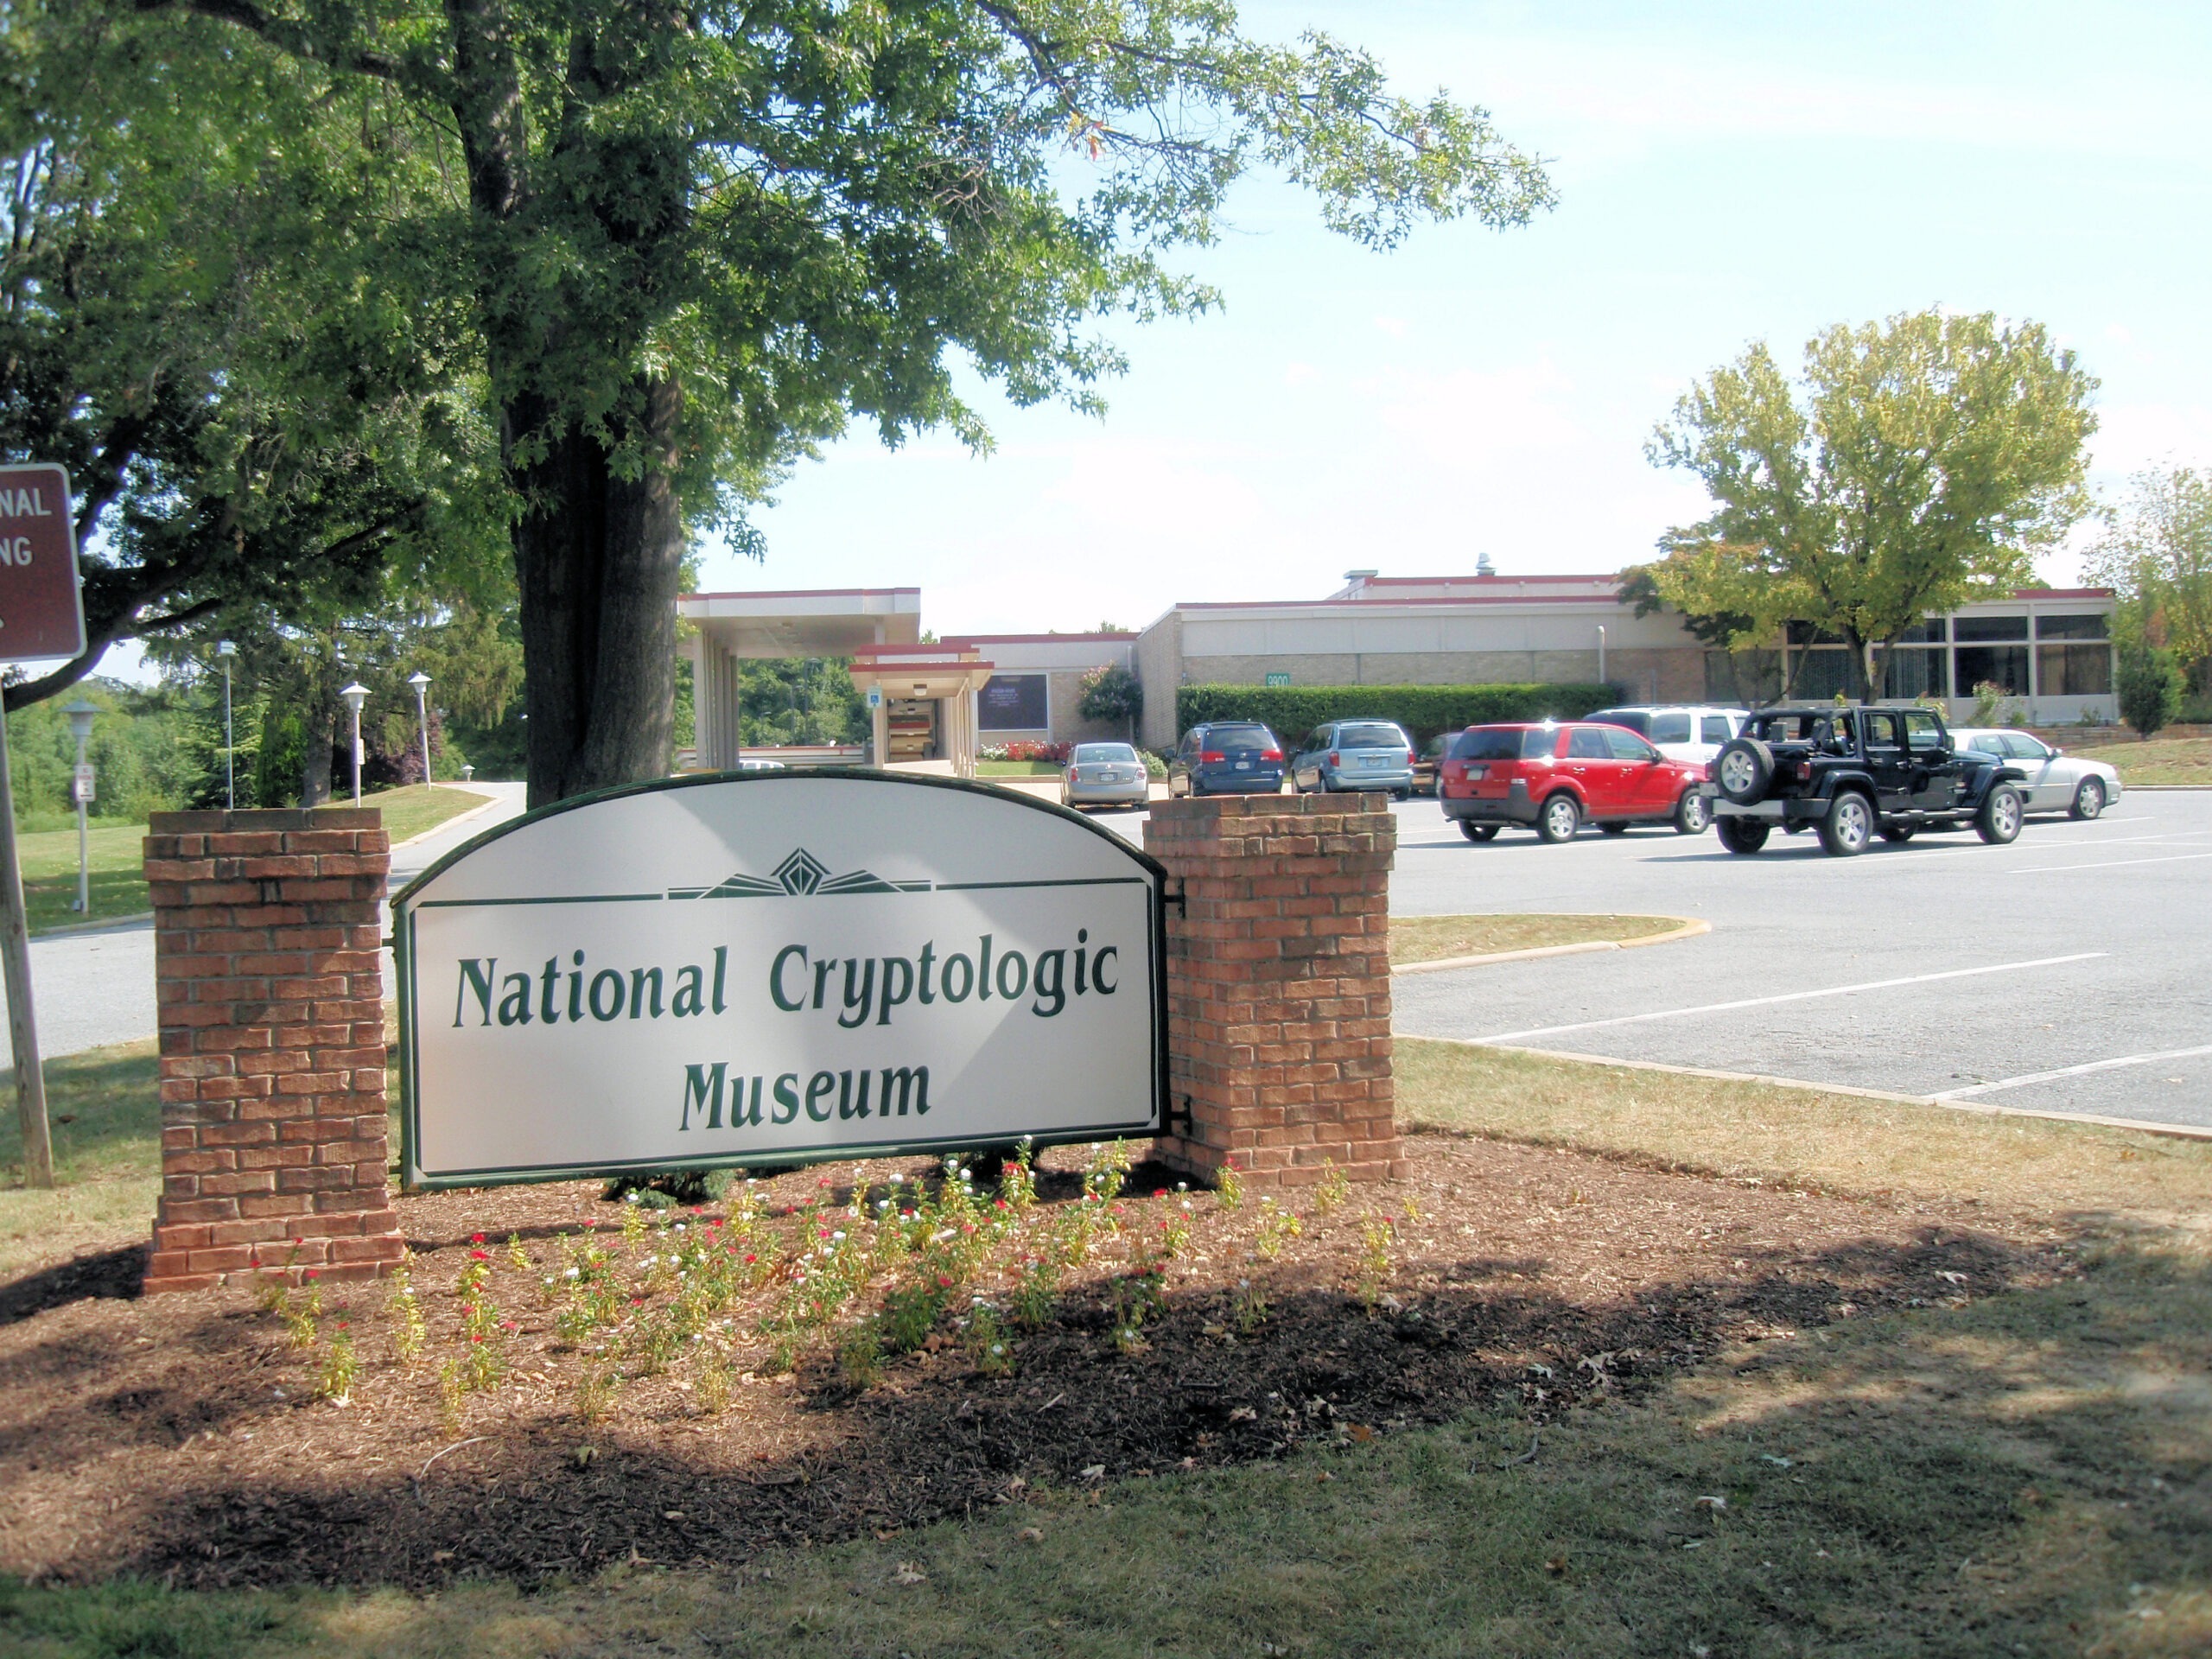 National Cryptologic Museum, Fort Meade, MD